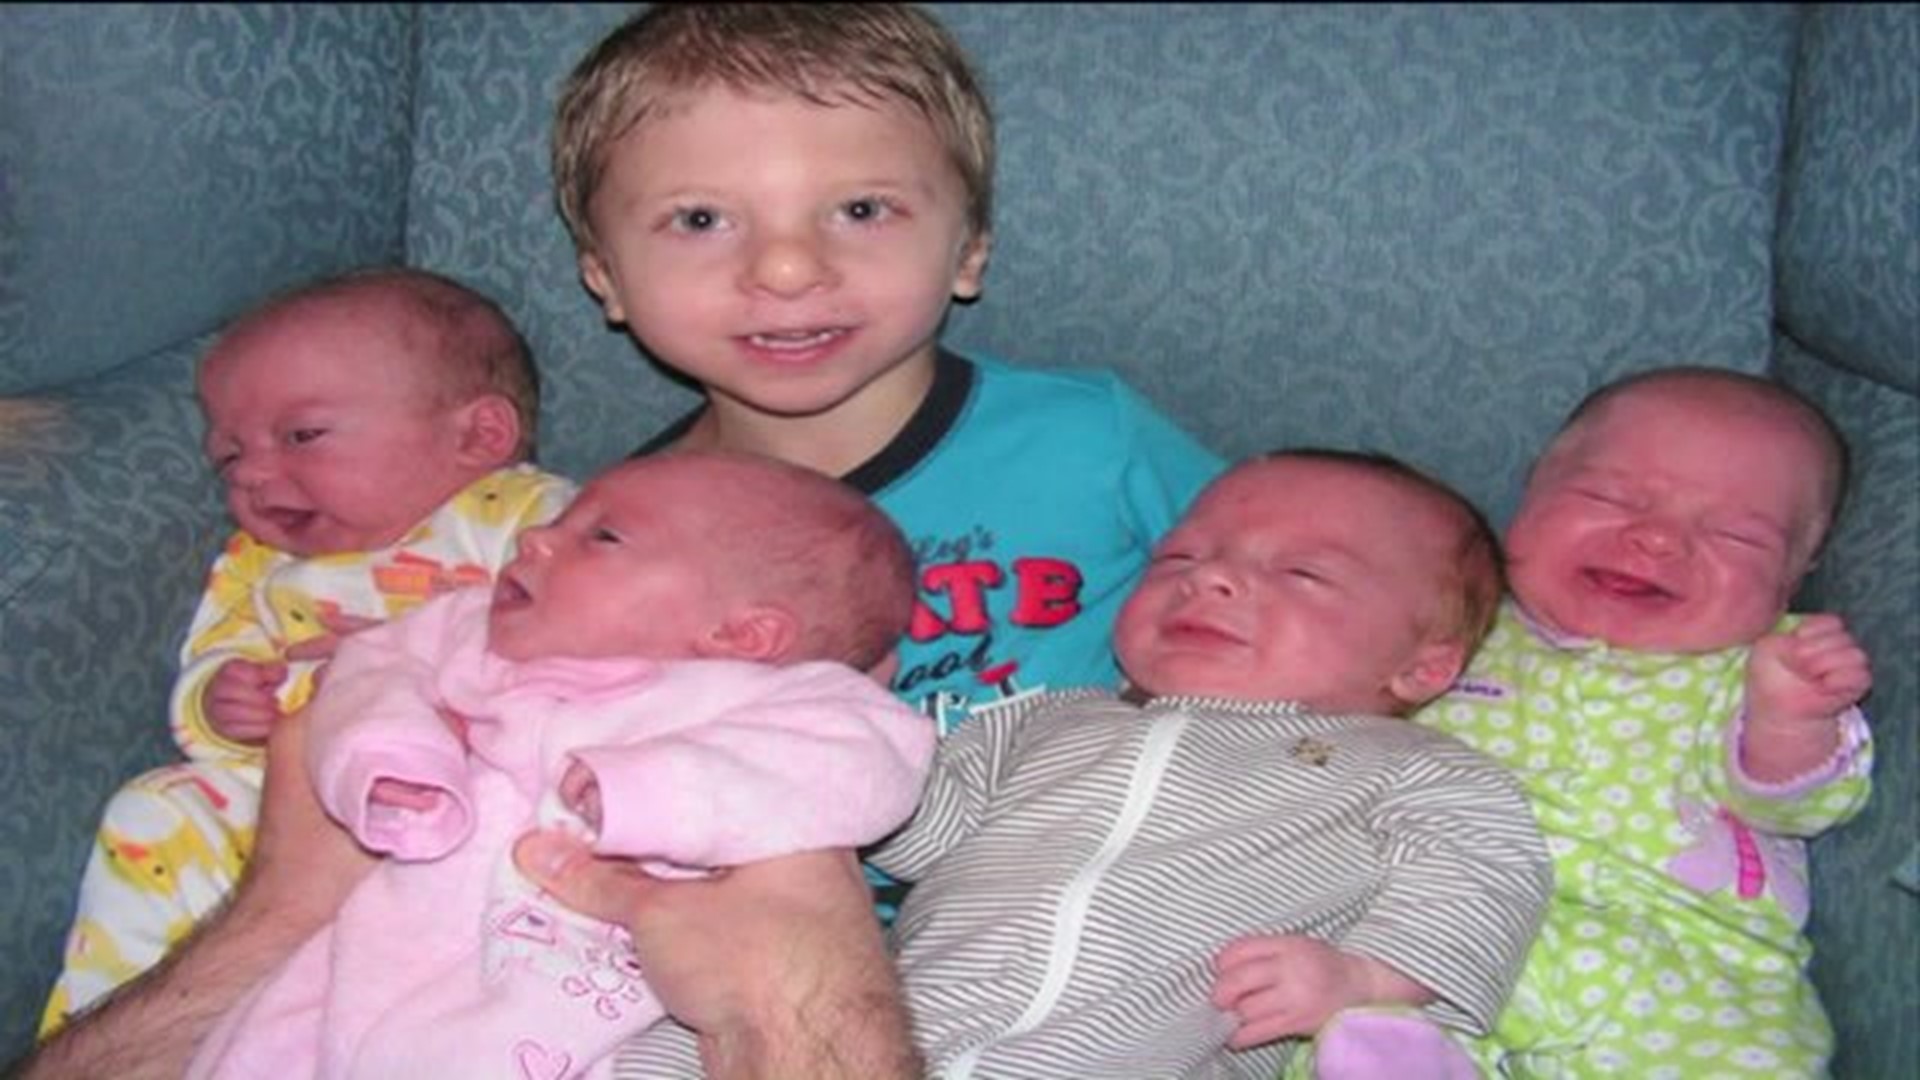 Mother of 5 has 4 children with special needs